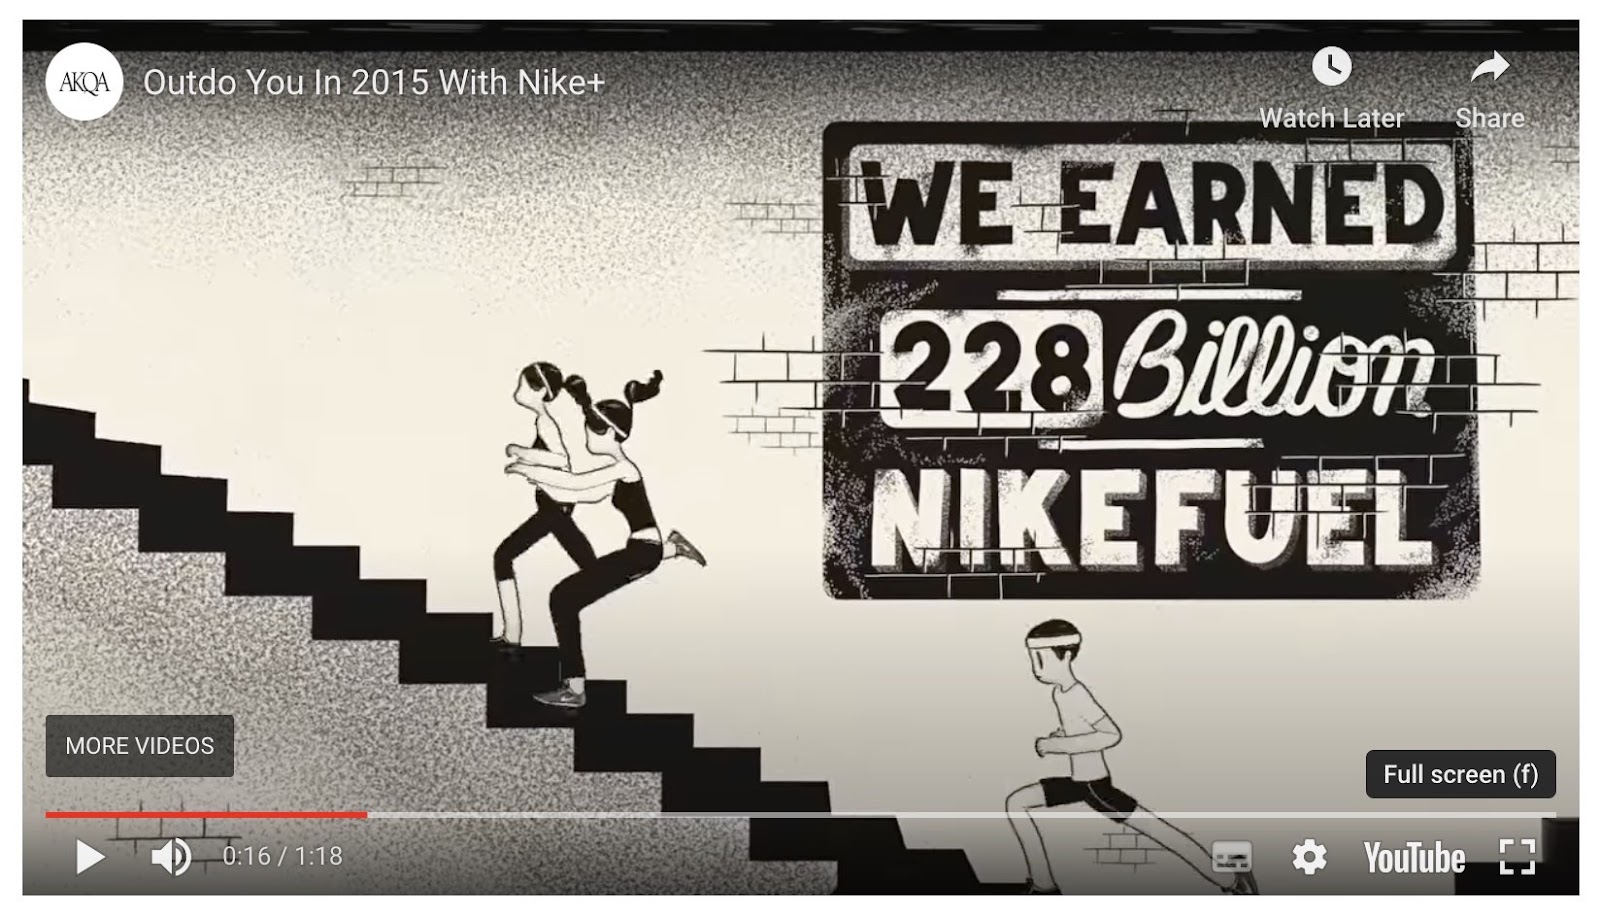 Nike's personalized animated video